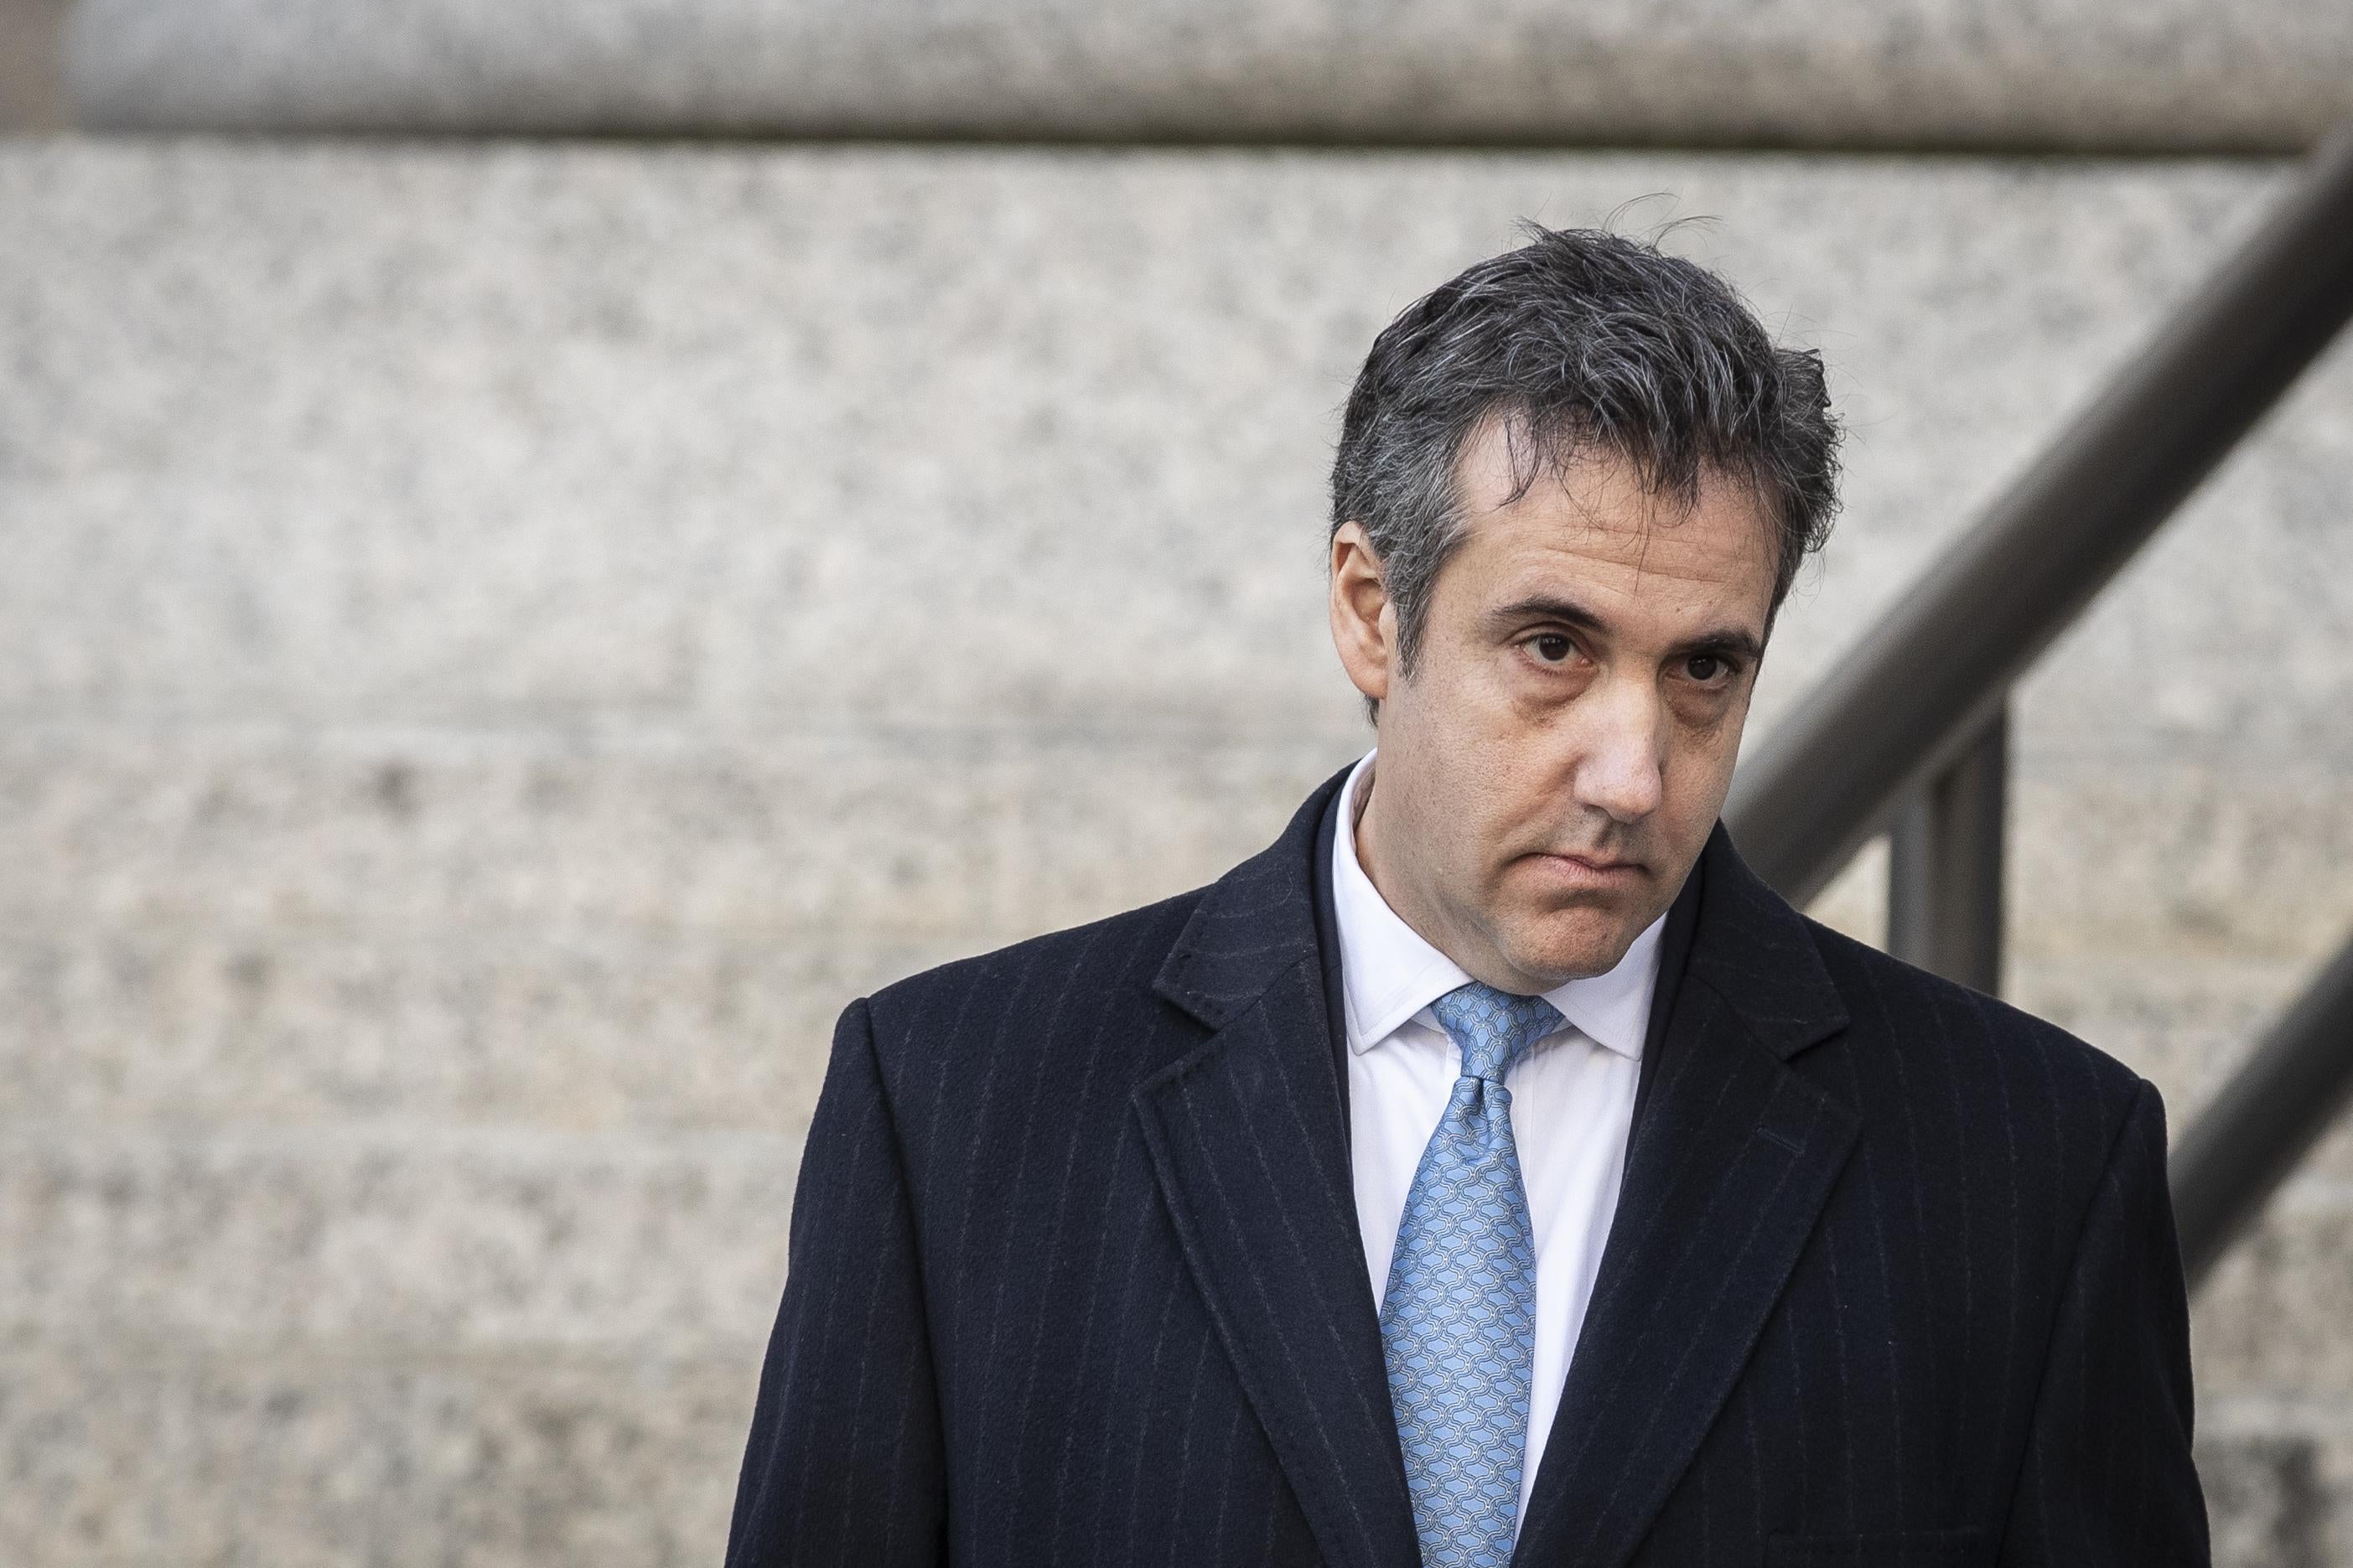 A dejected- or exhausted-looking Michael Cohen, appears to stare out of focus and lost in thoughts.